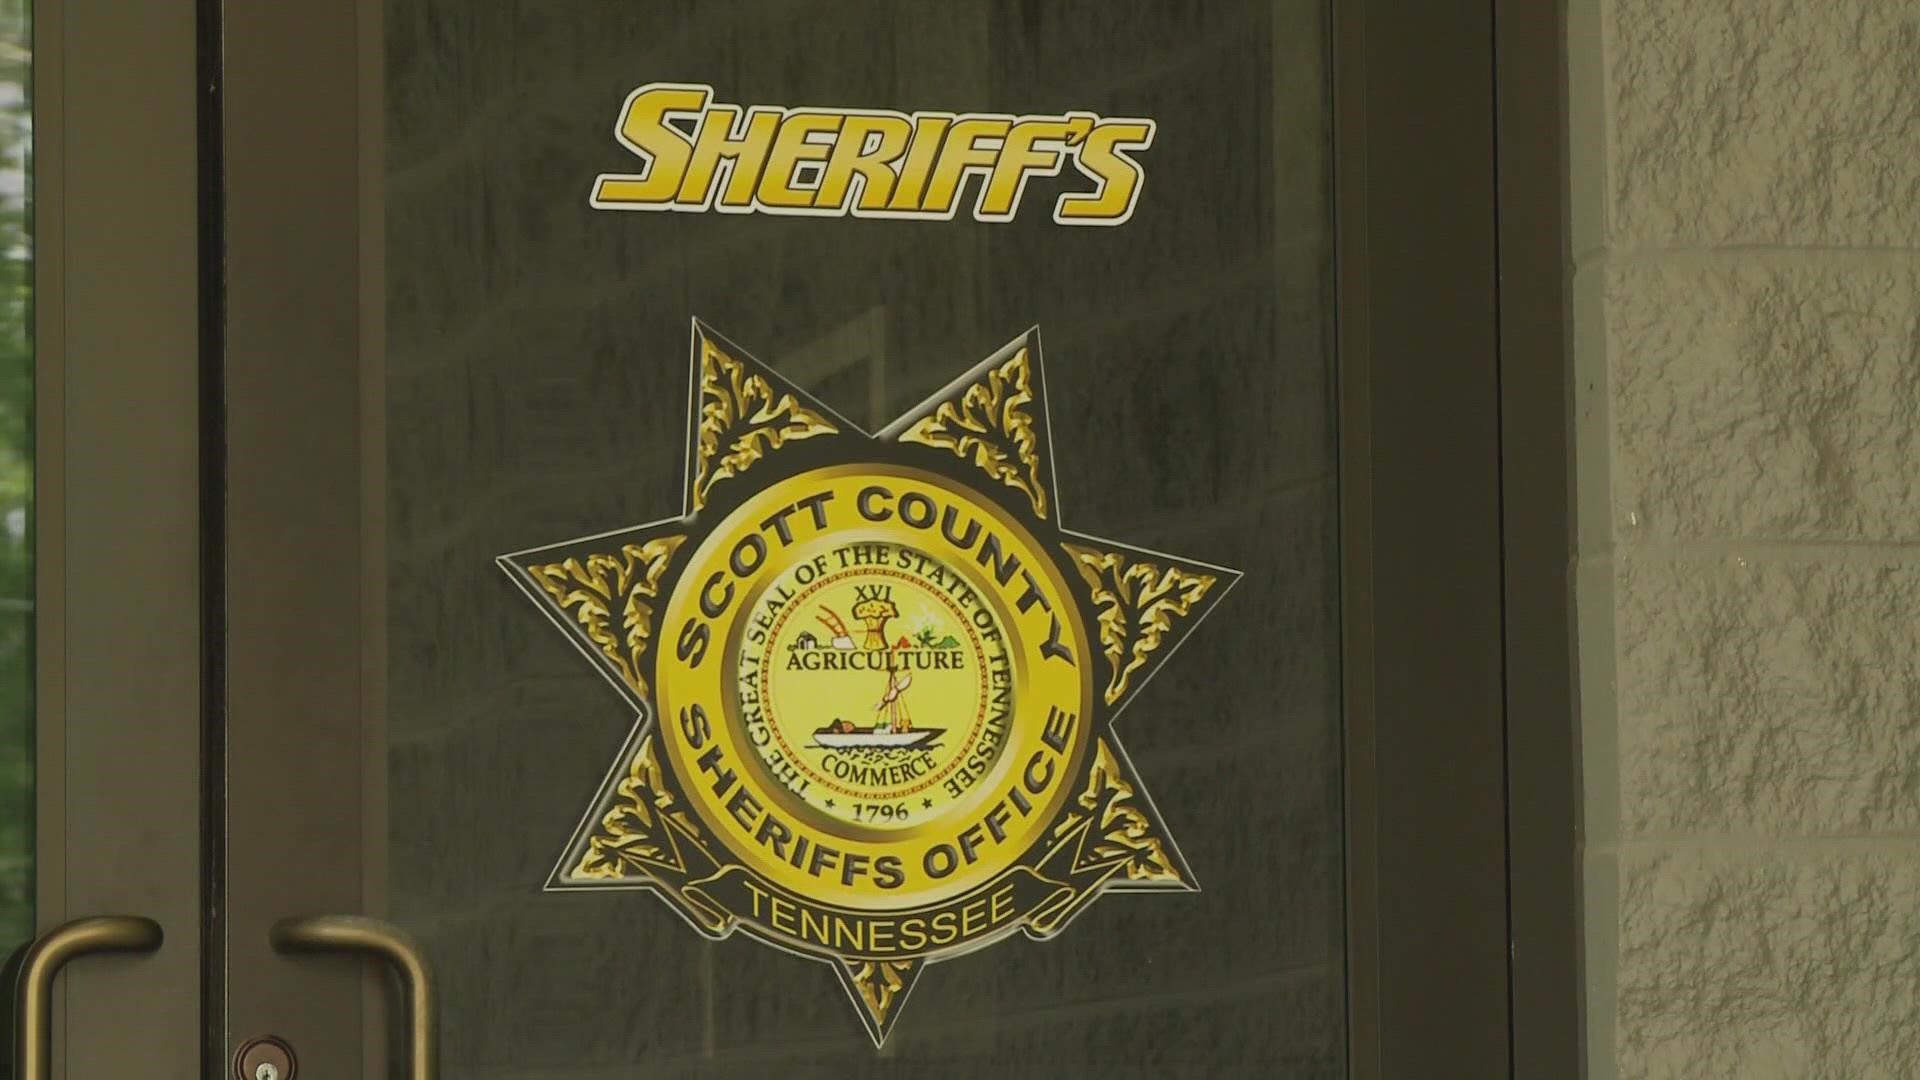 The sheriff also announced his office would require new and additional law enforcement training on ethical communication and de-escalation after the incident.